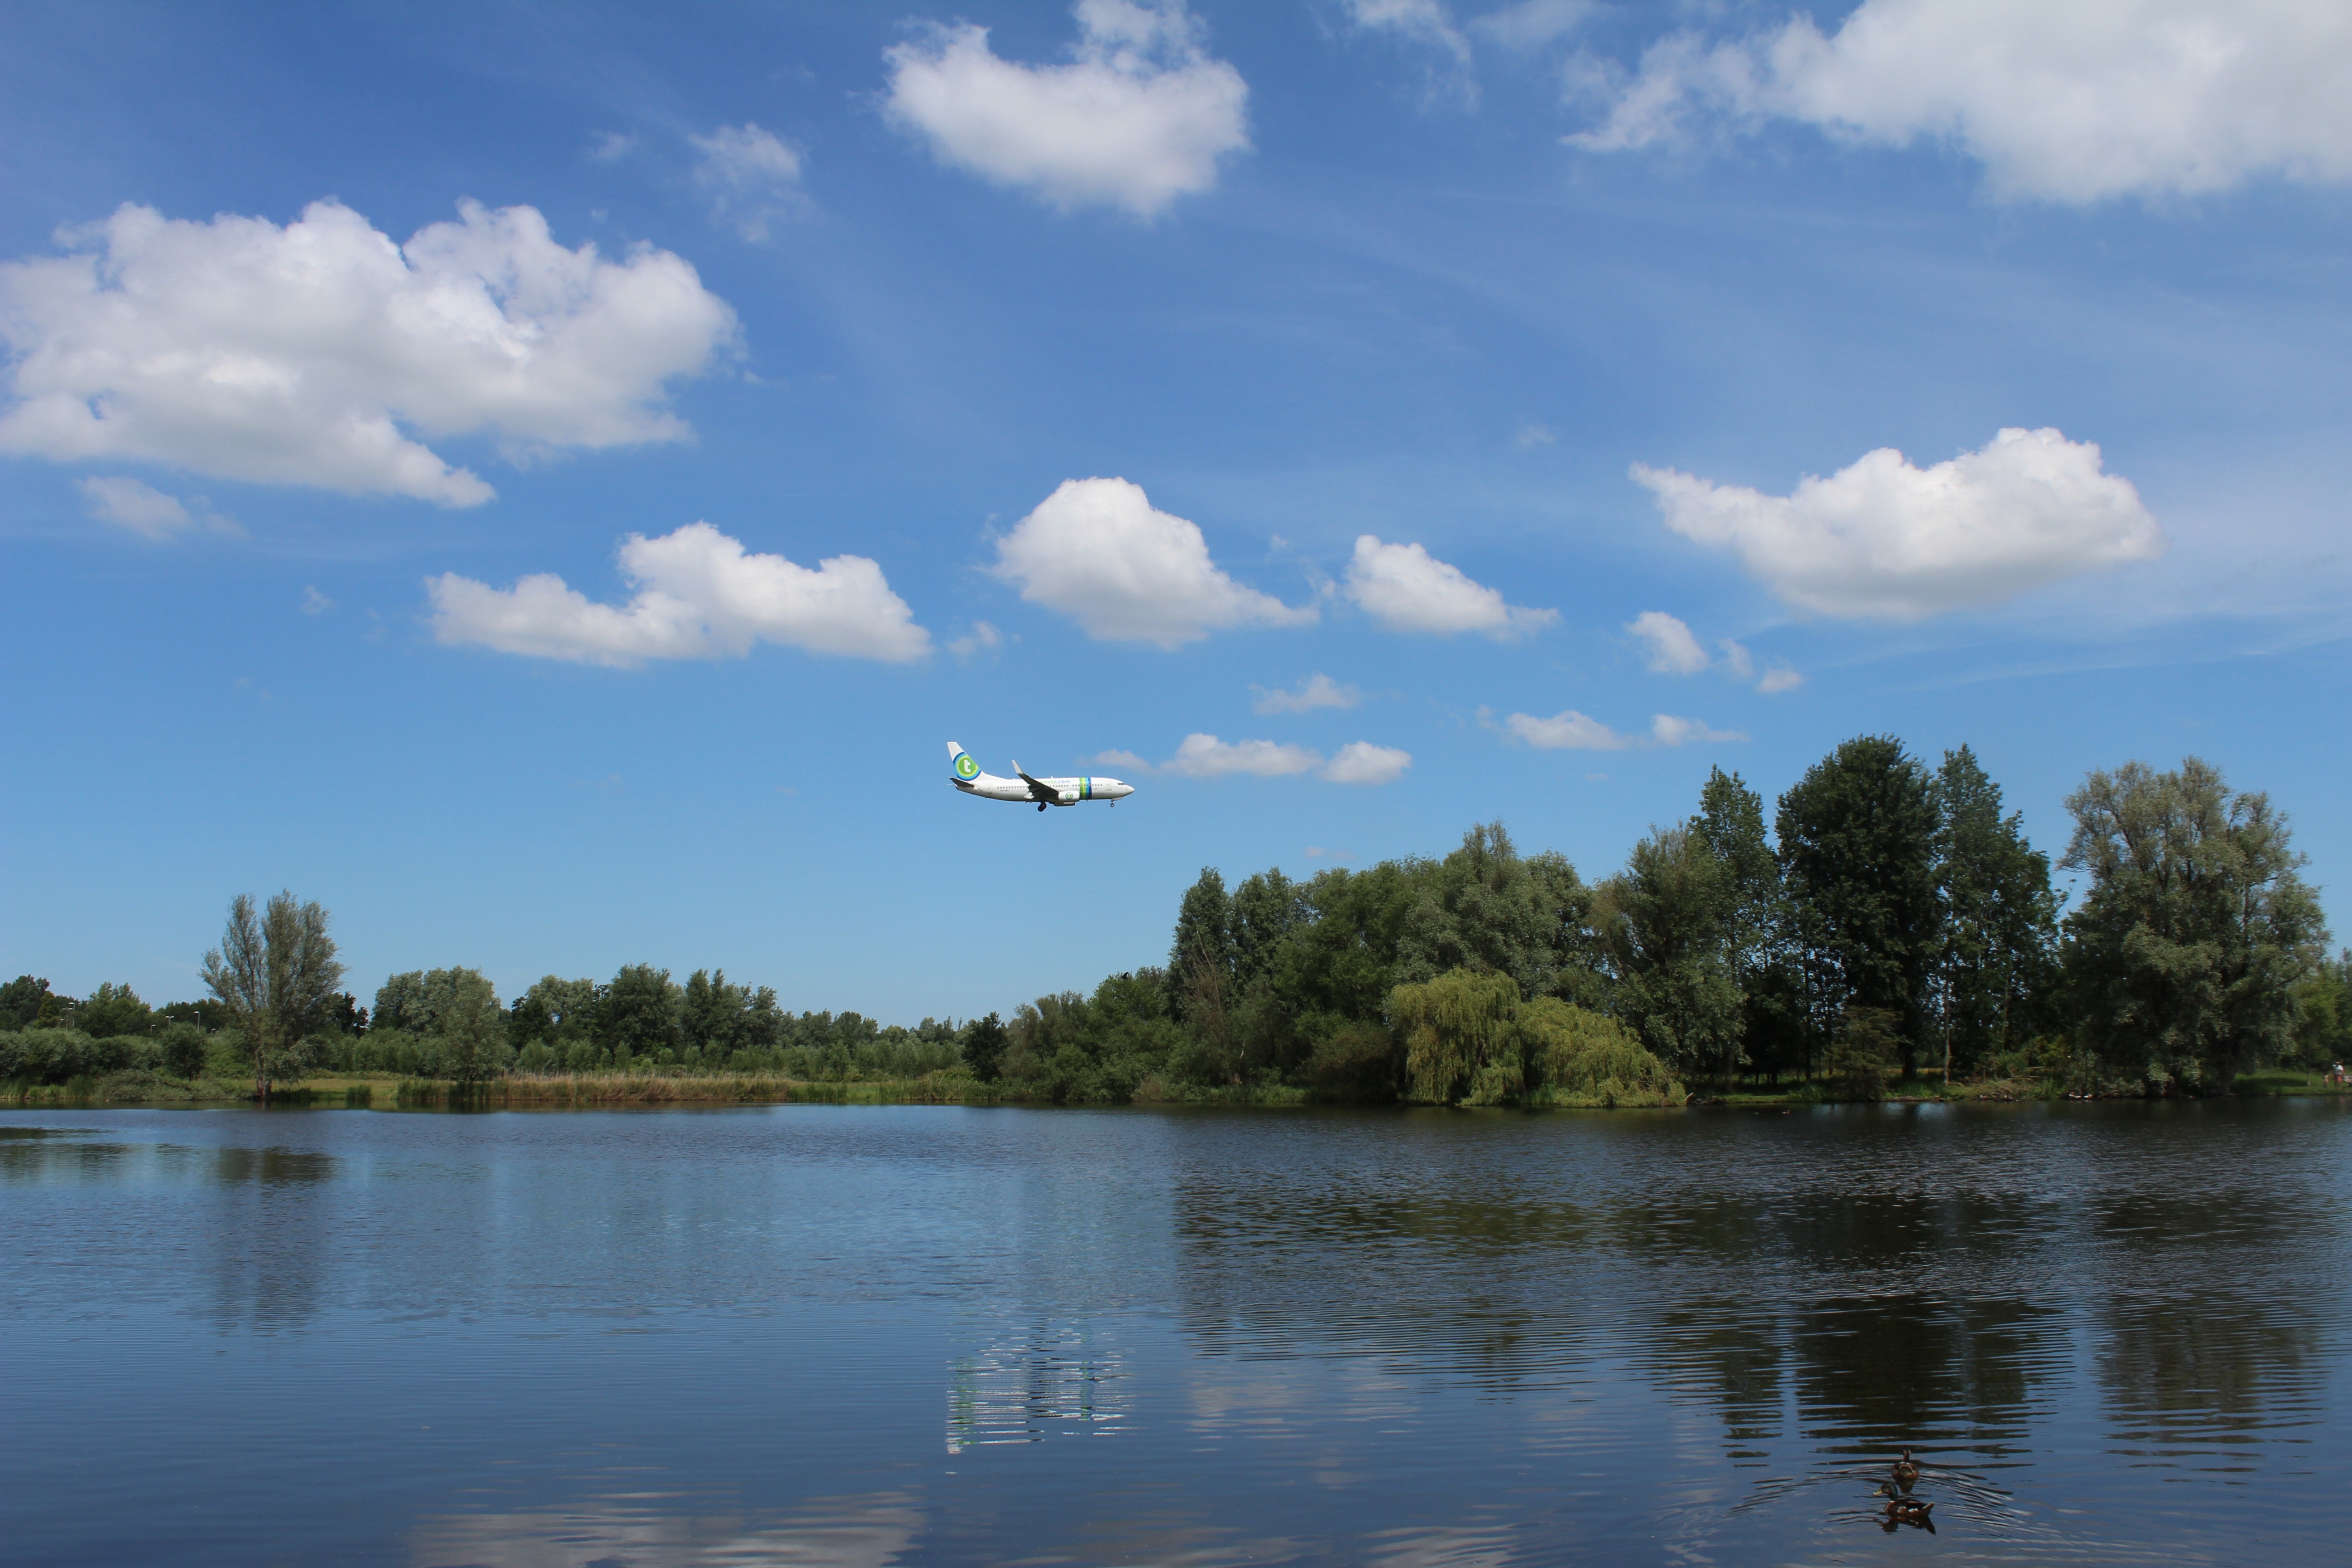 white airplane and green leaved trees